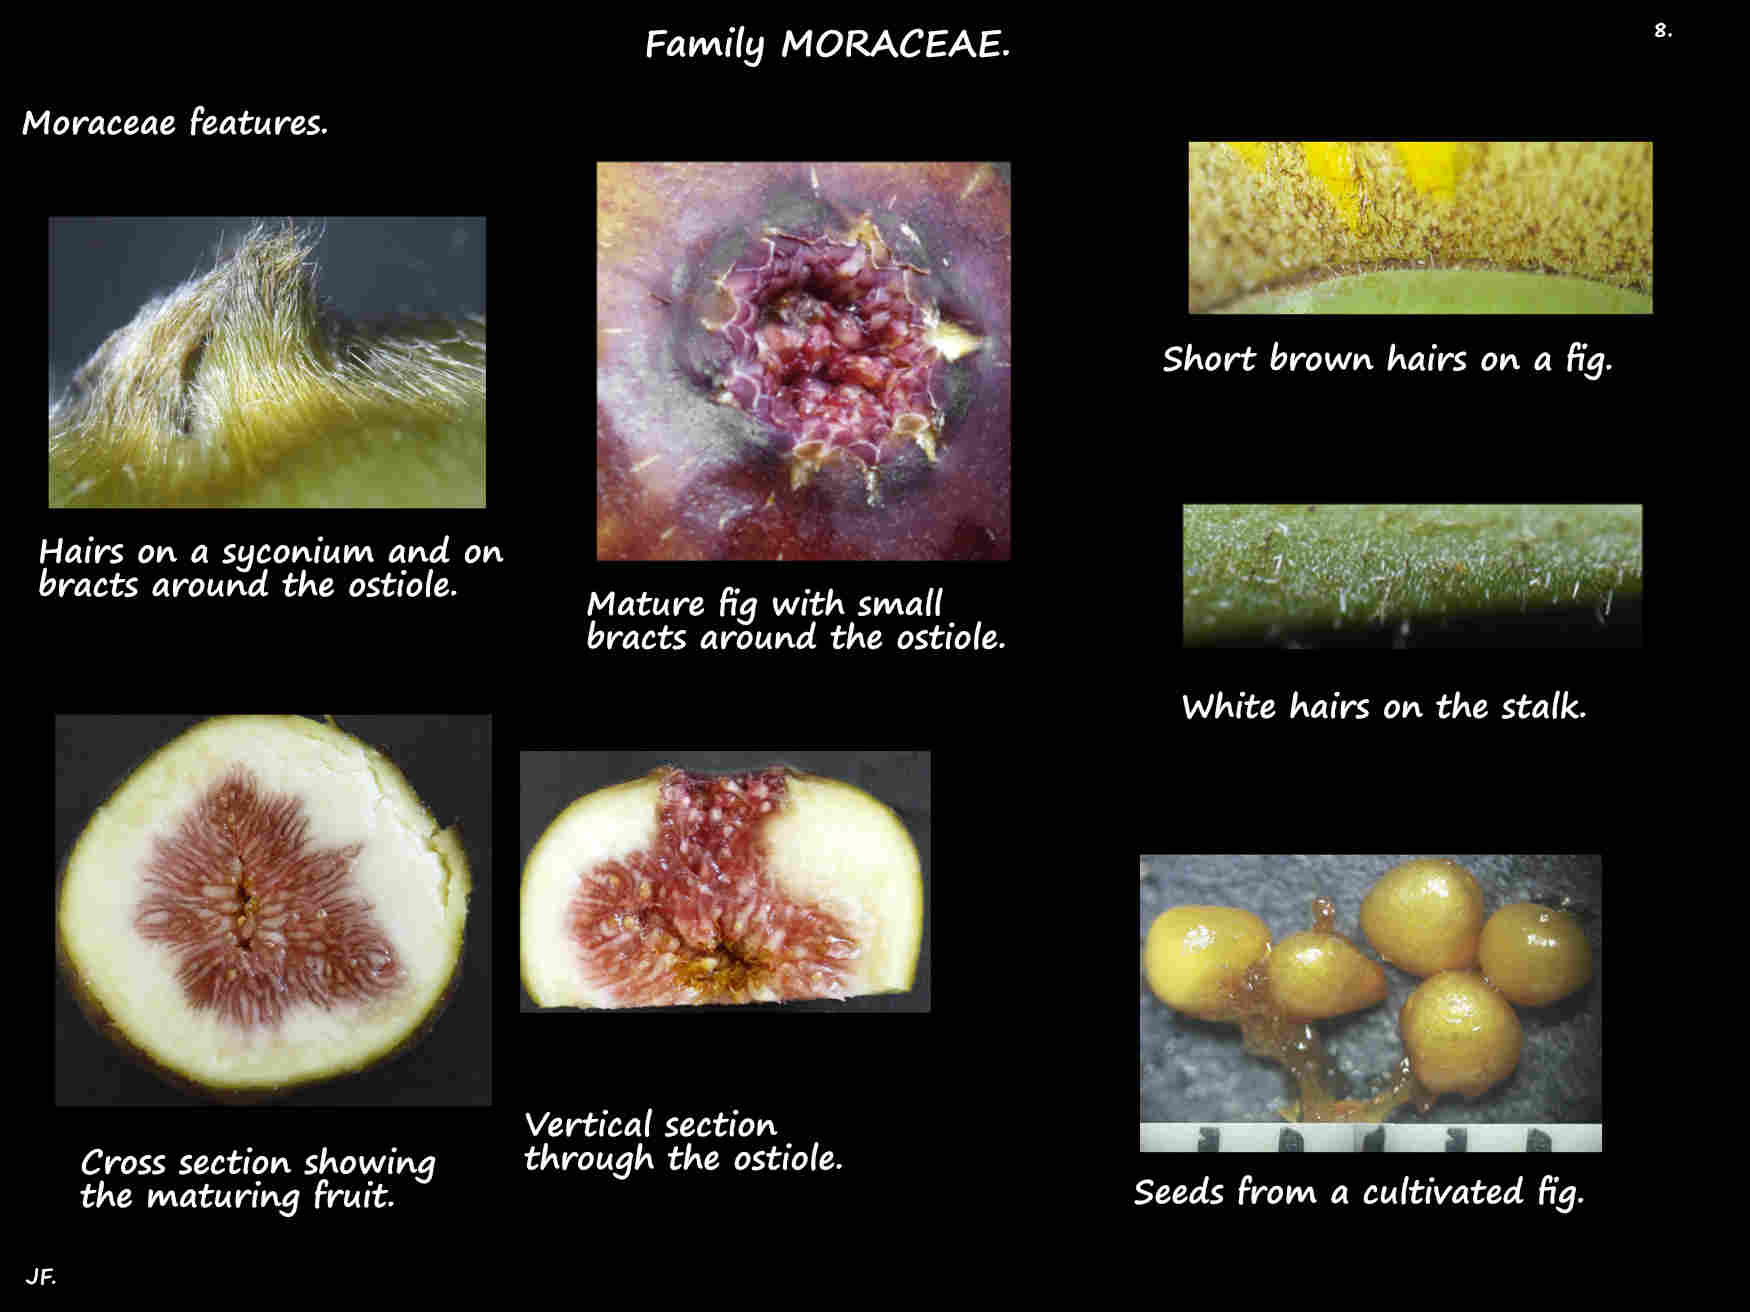 8 Some features of Moraceae fruit